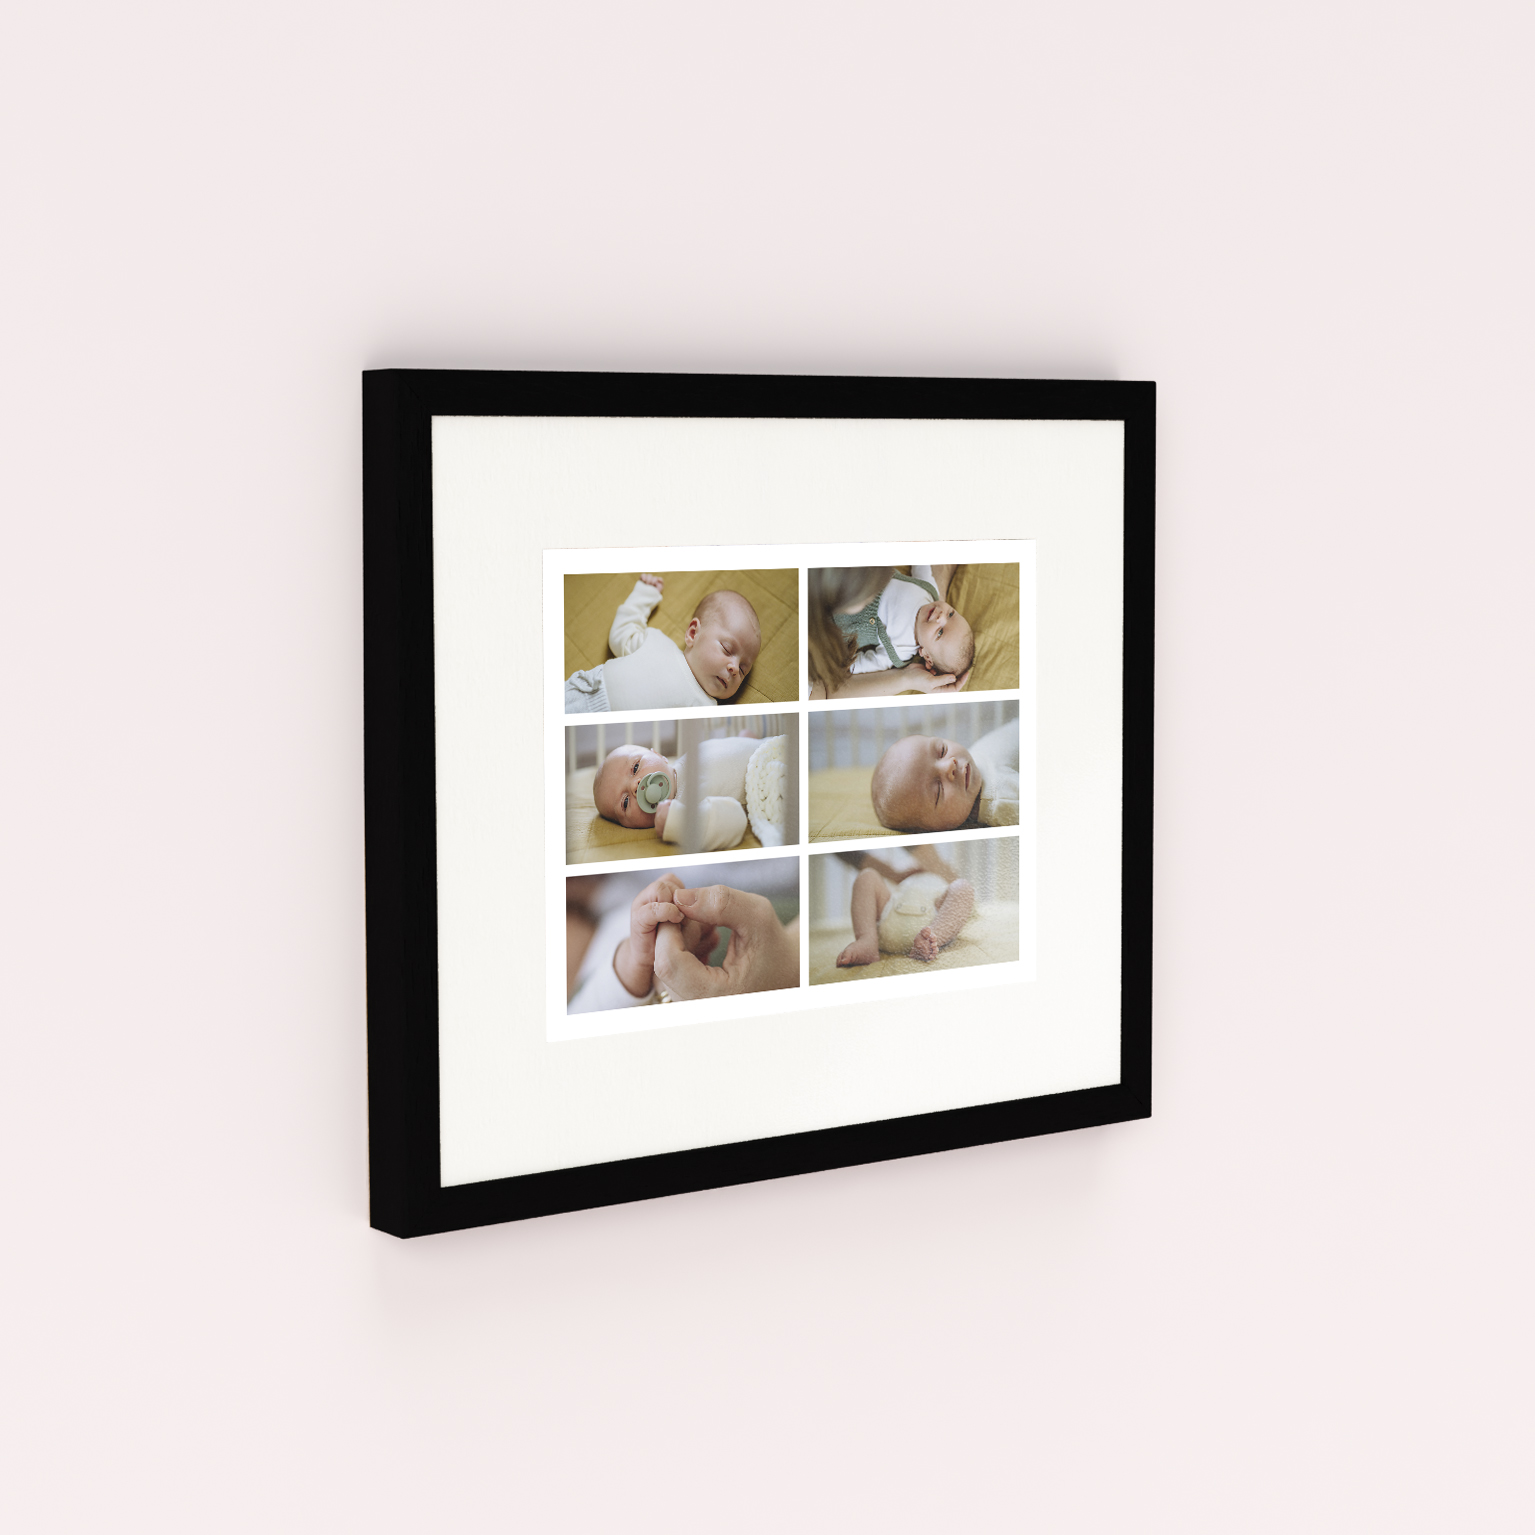 Children's Mosaic Framed Photo Print - Capture childhood magic with this landscape-oriented print featuring an elegant arrangement of six photos in a mosaic design. Printed on quality Fujifilm paper, encased in a cream frame. Ready to hang, preserving treasured memories for generations.